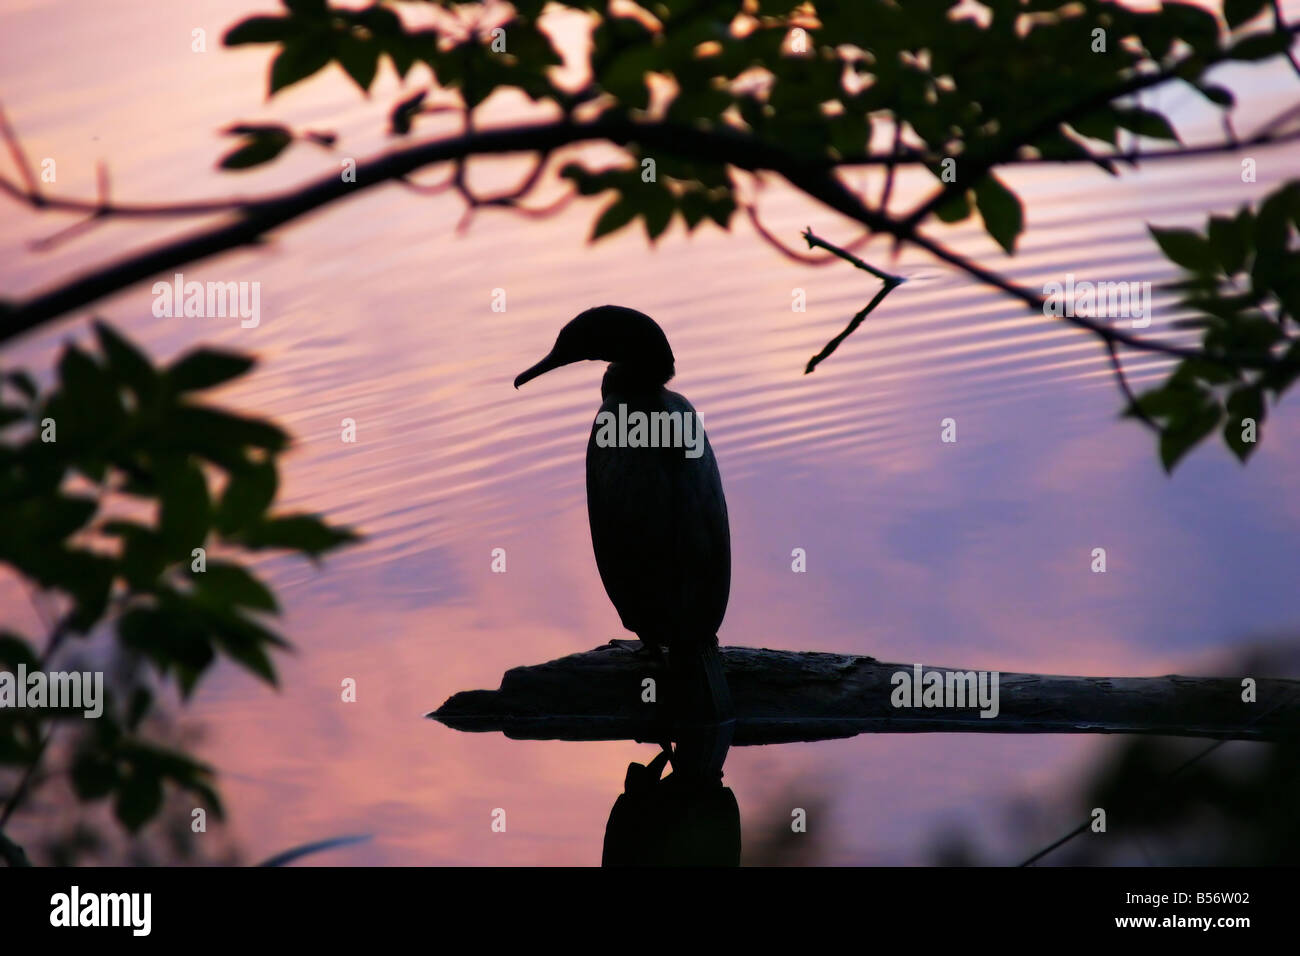 A cormorant rests on a log in a lake at sunset Stock Photo